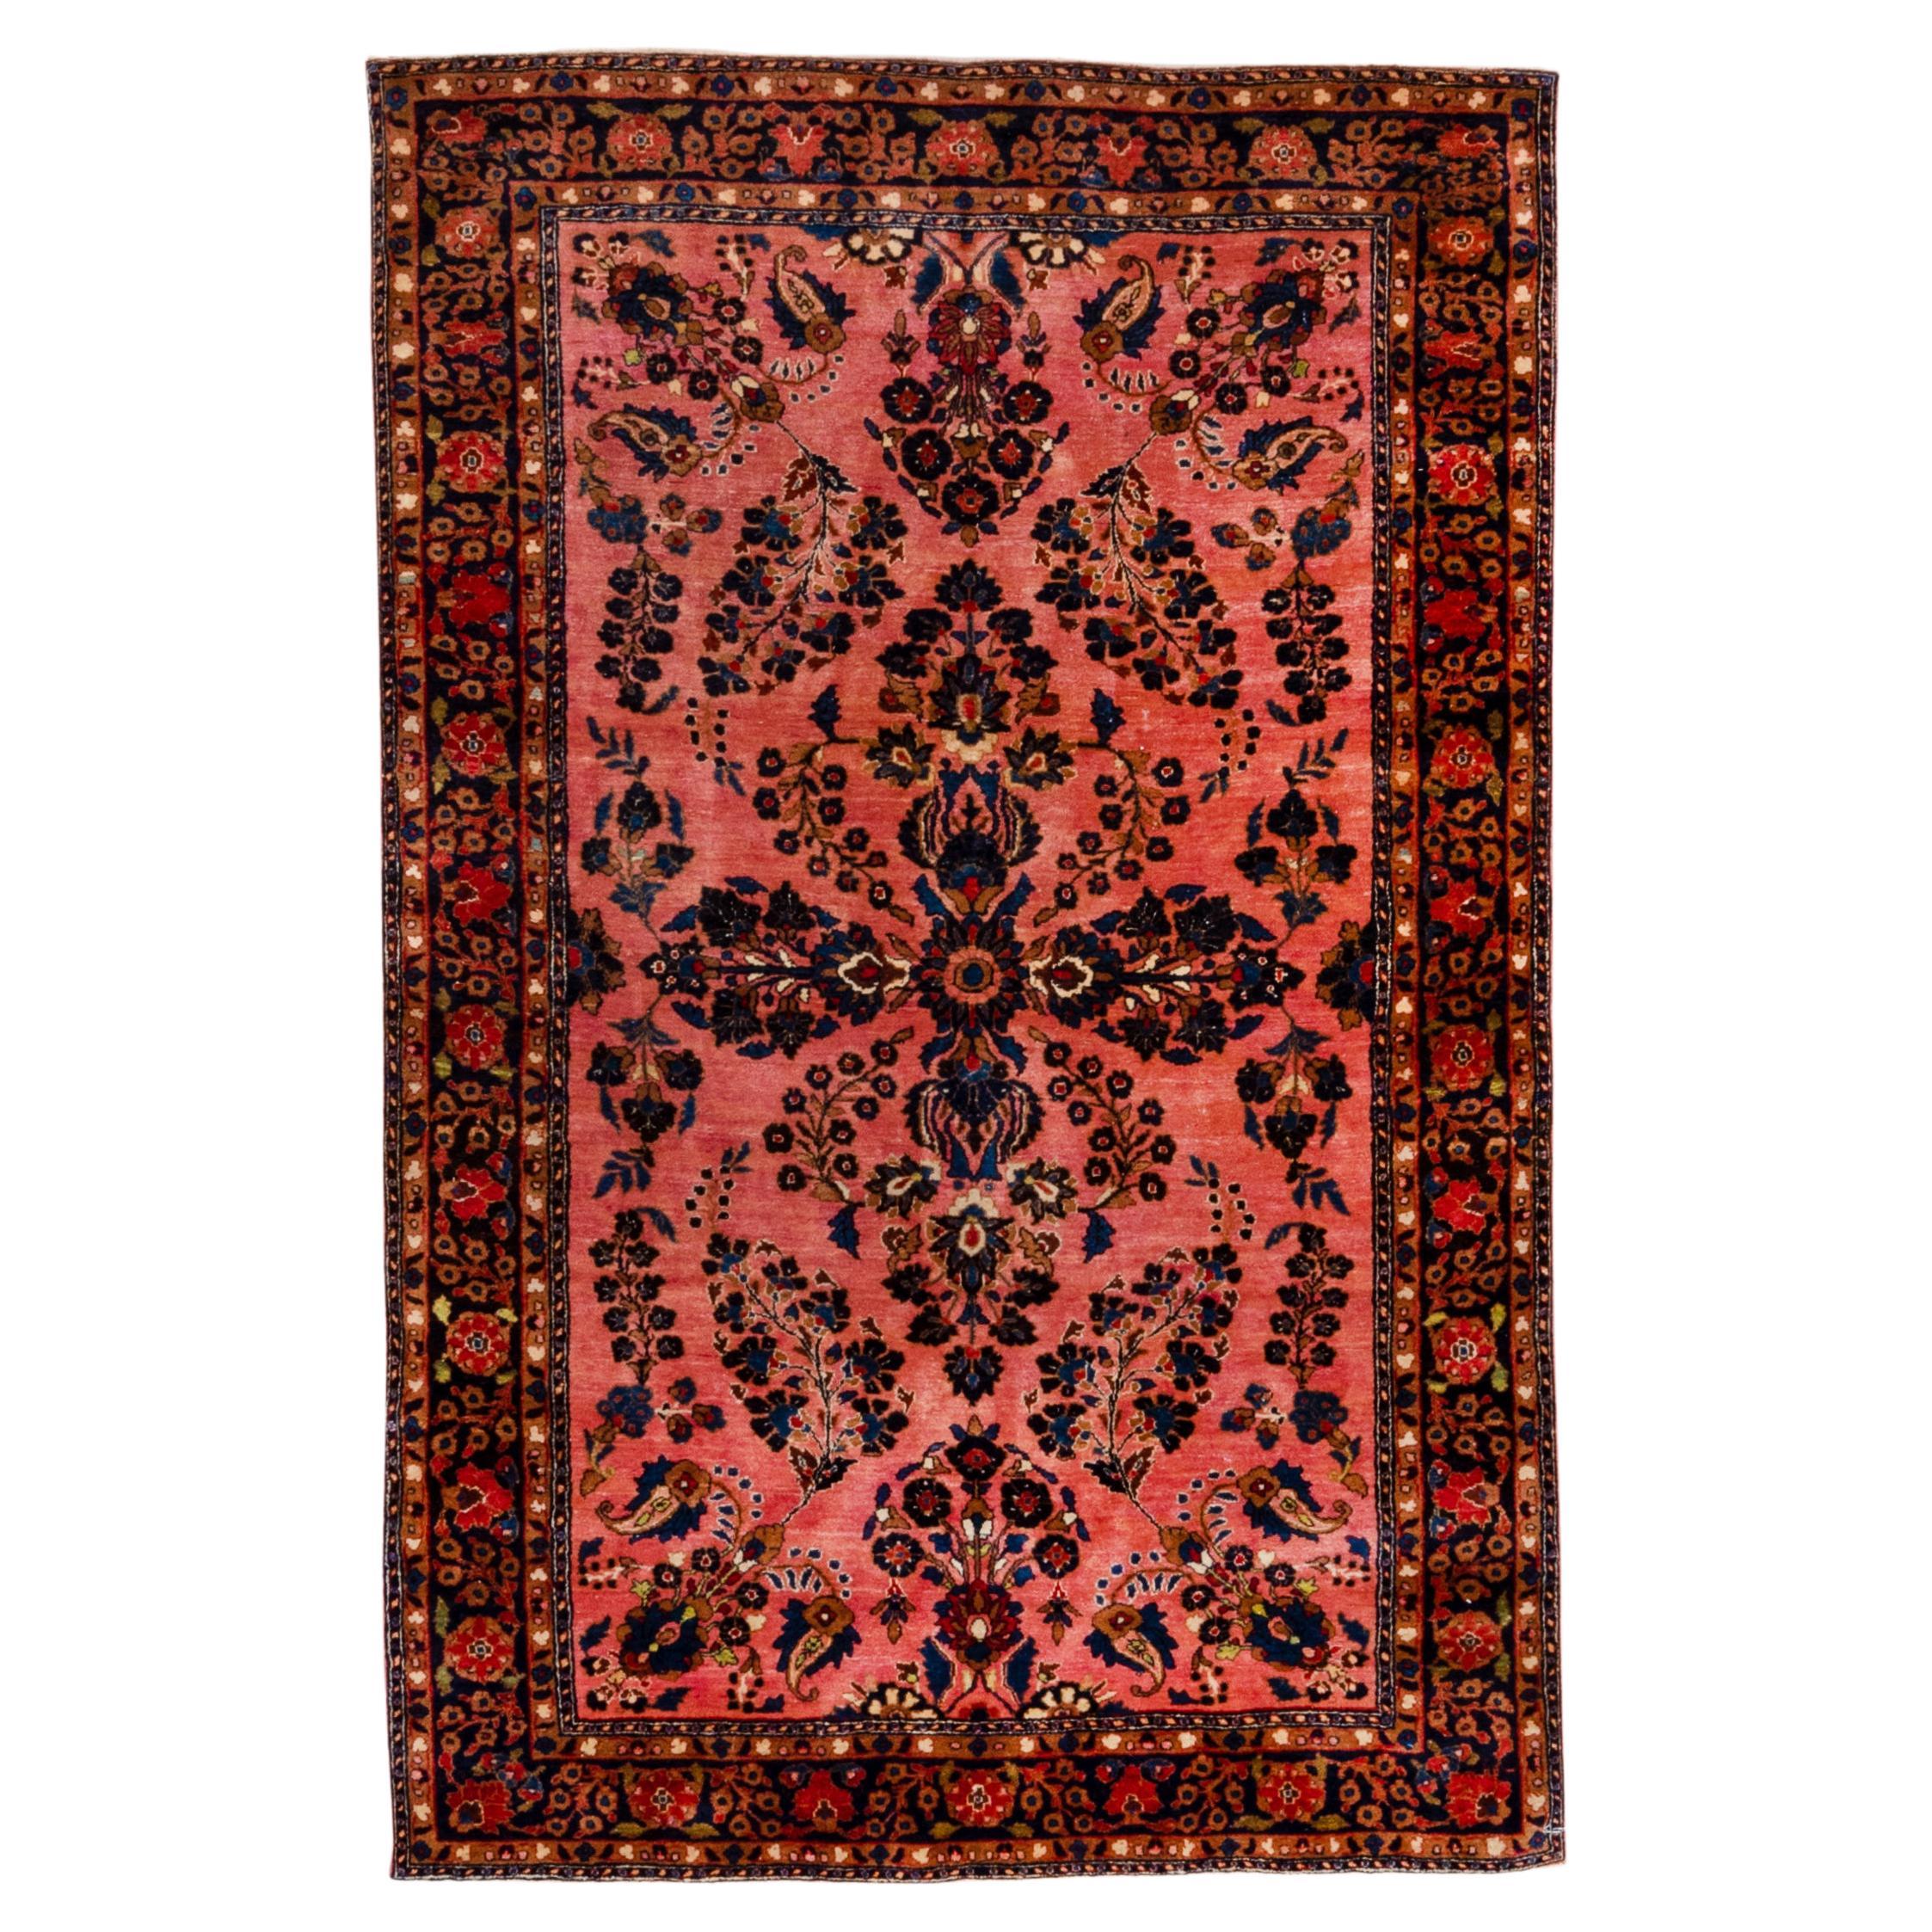 Antique Persian Sarouk Rug, Hot Pink Field, Navy Borders, circa 9s0 For Sale